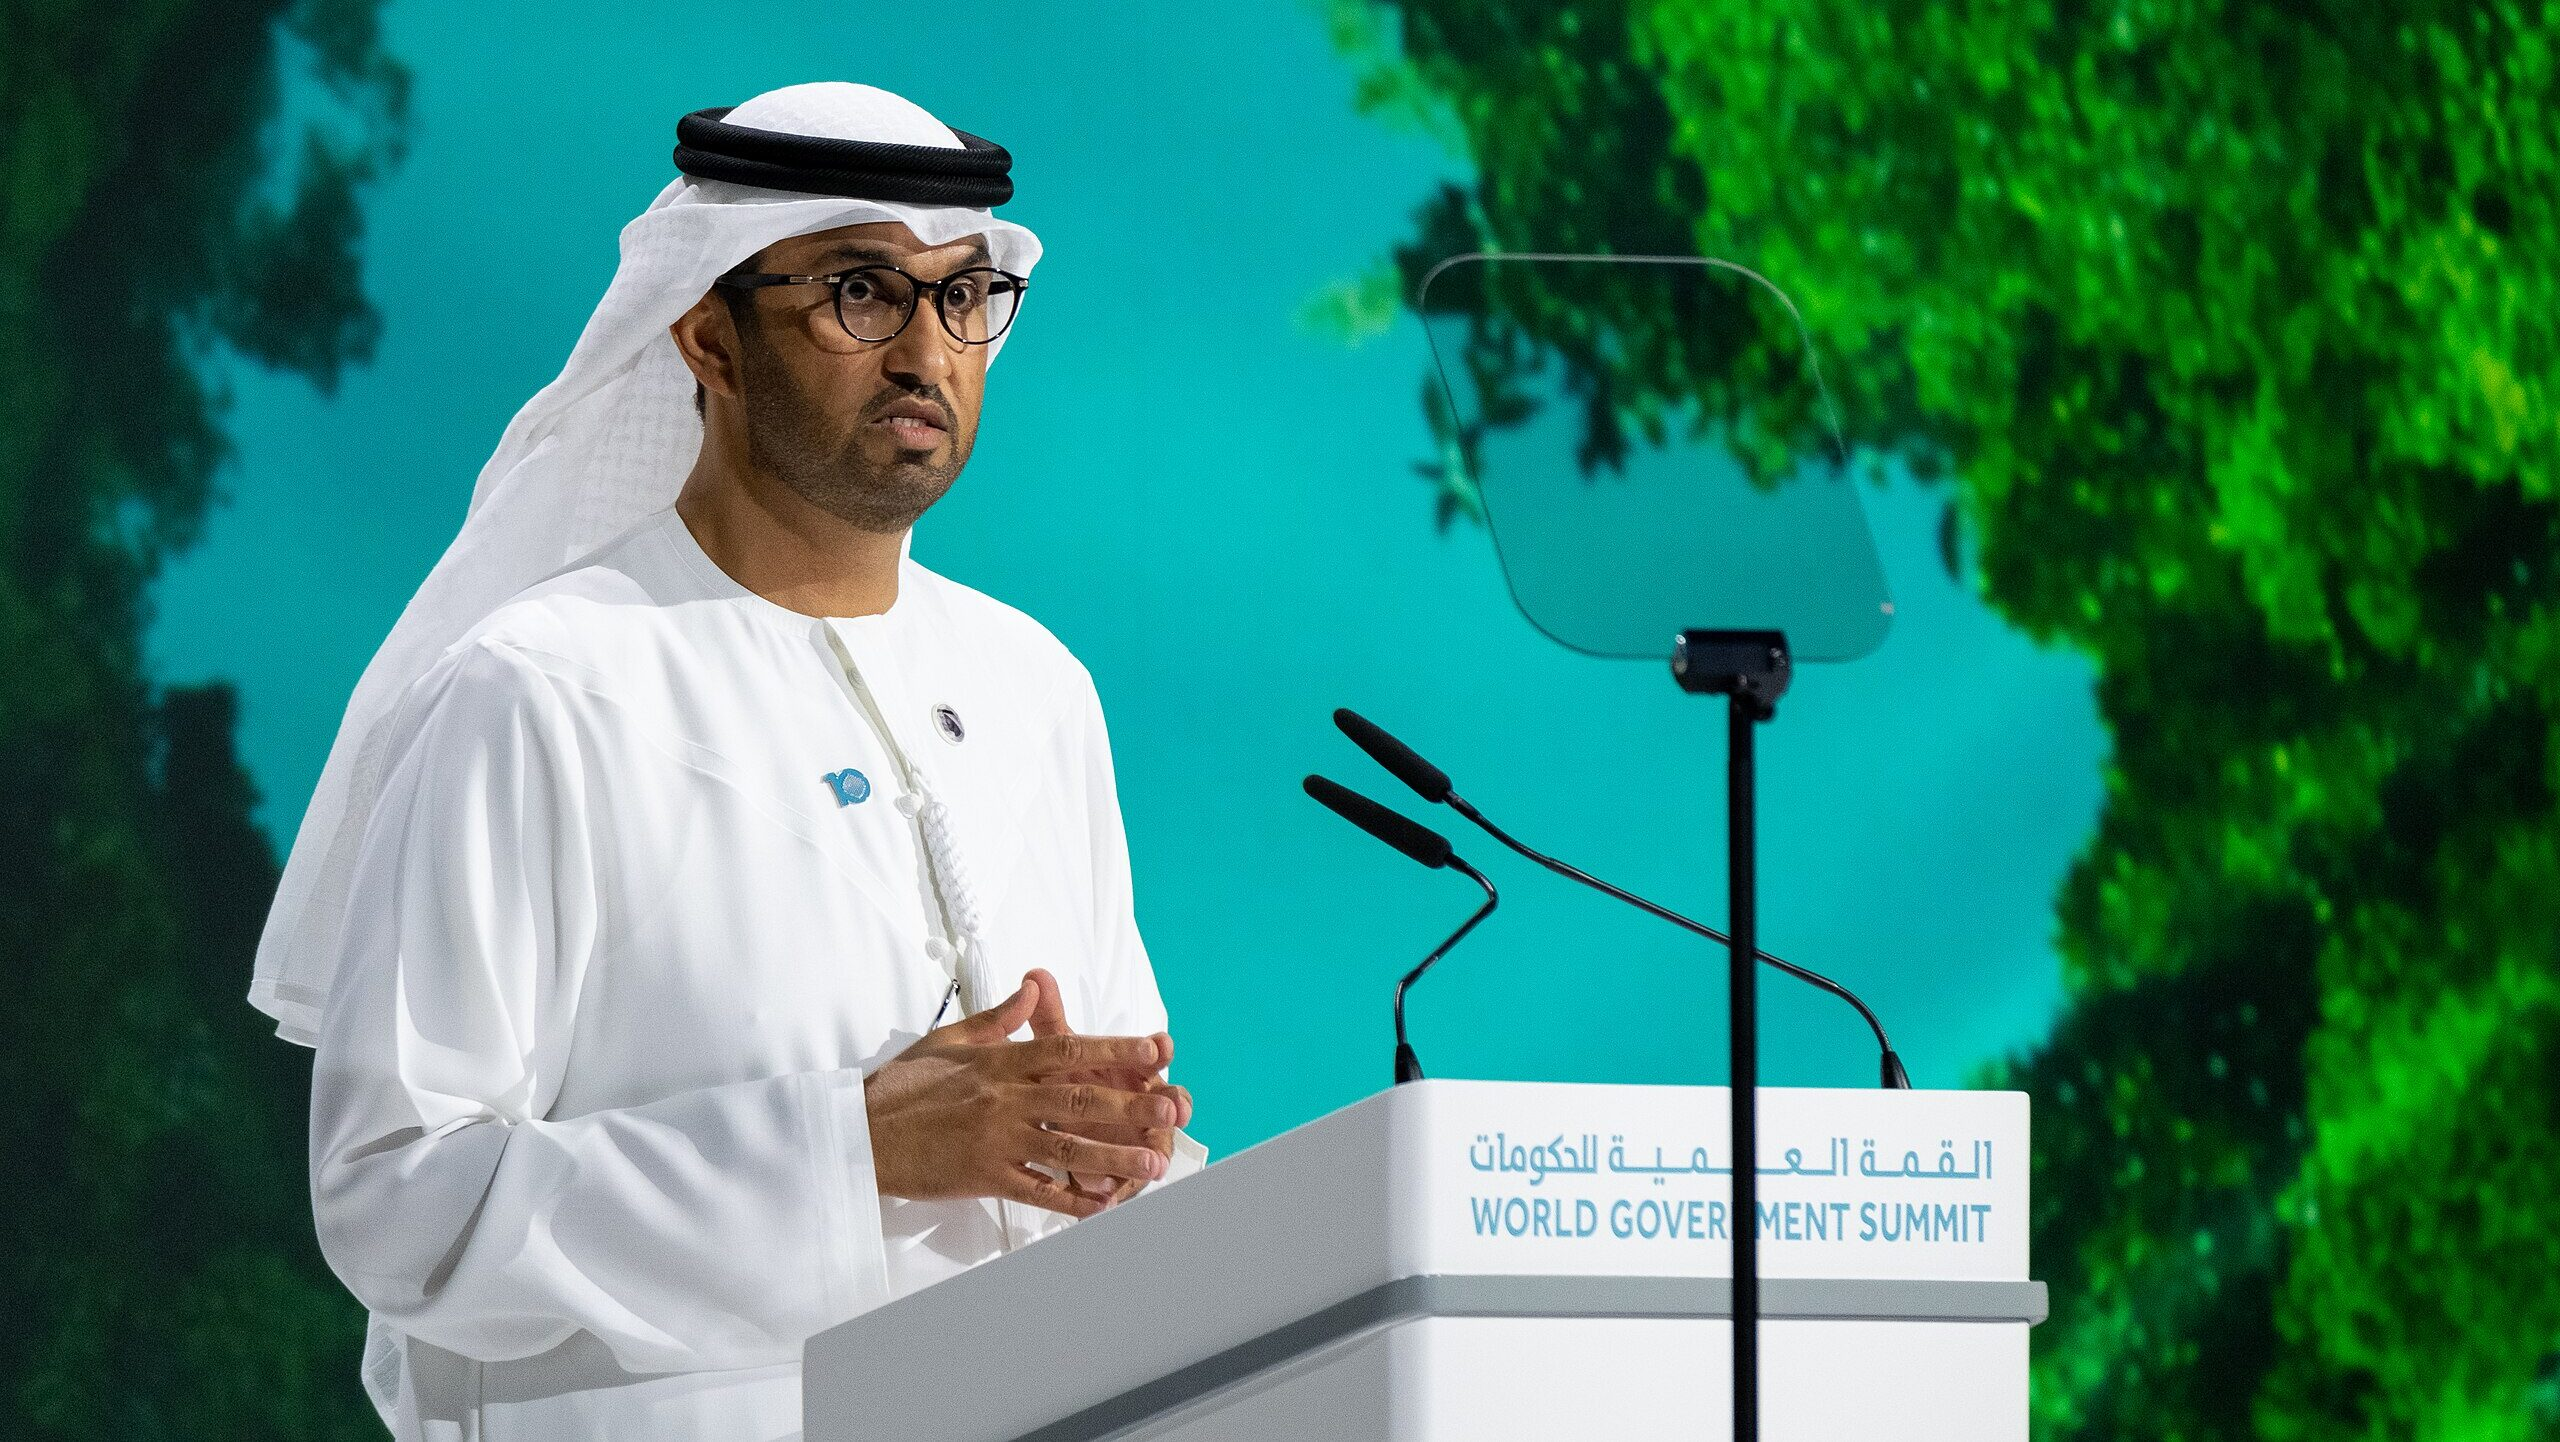 President of COP28, Dr. Sultan bin Ahmed Al Jaber, has passionately defended the UAE's transparent approach to the climate conference.